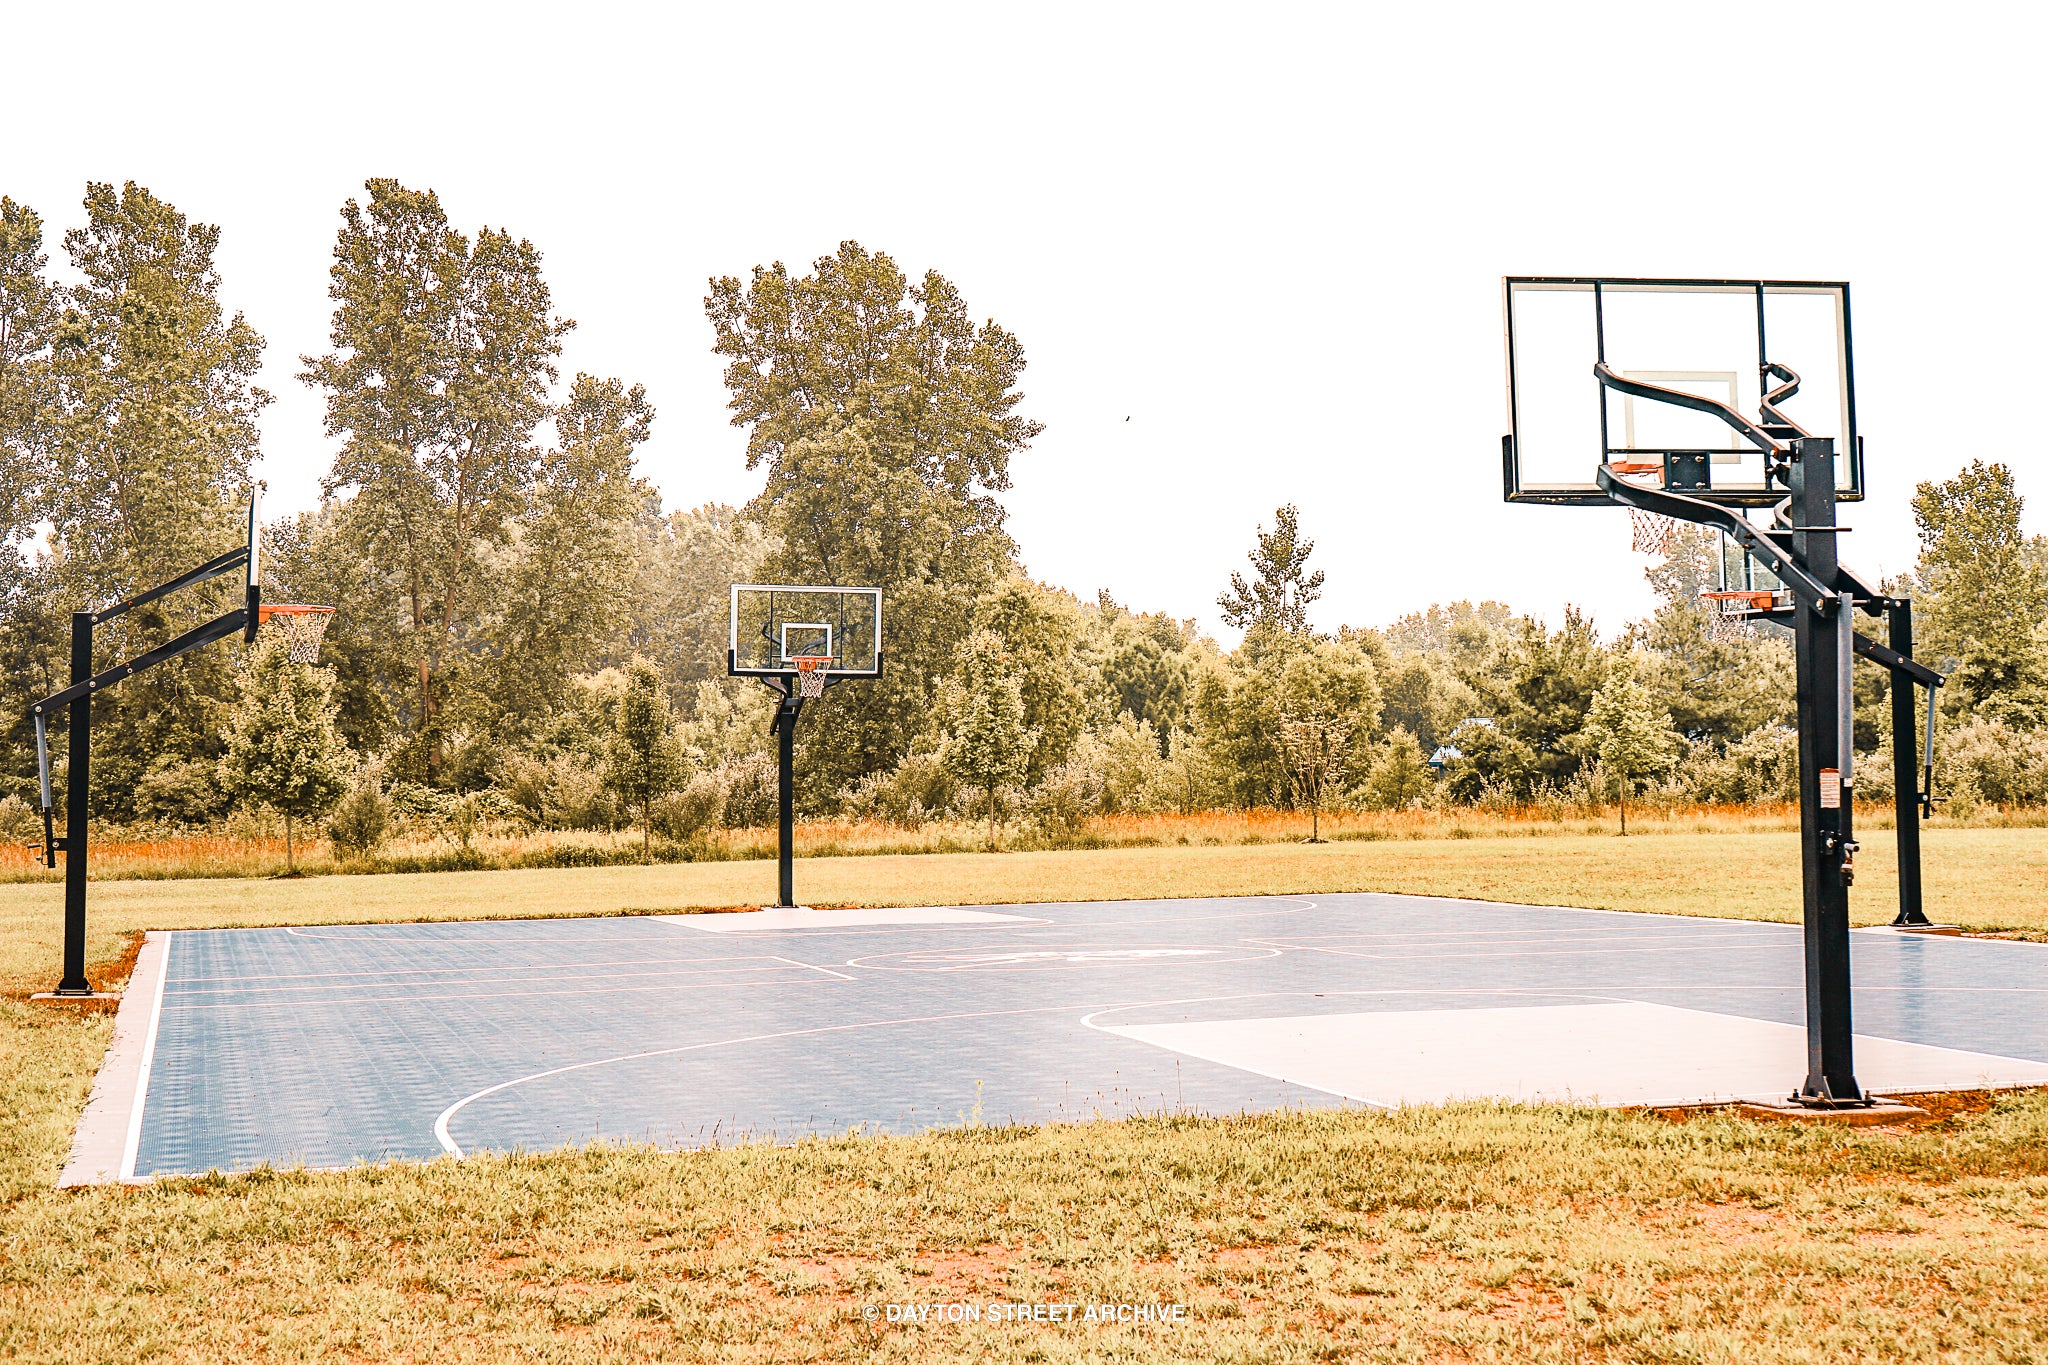 Photograph of dreamy basketball court with golden grass in Michigan